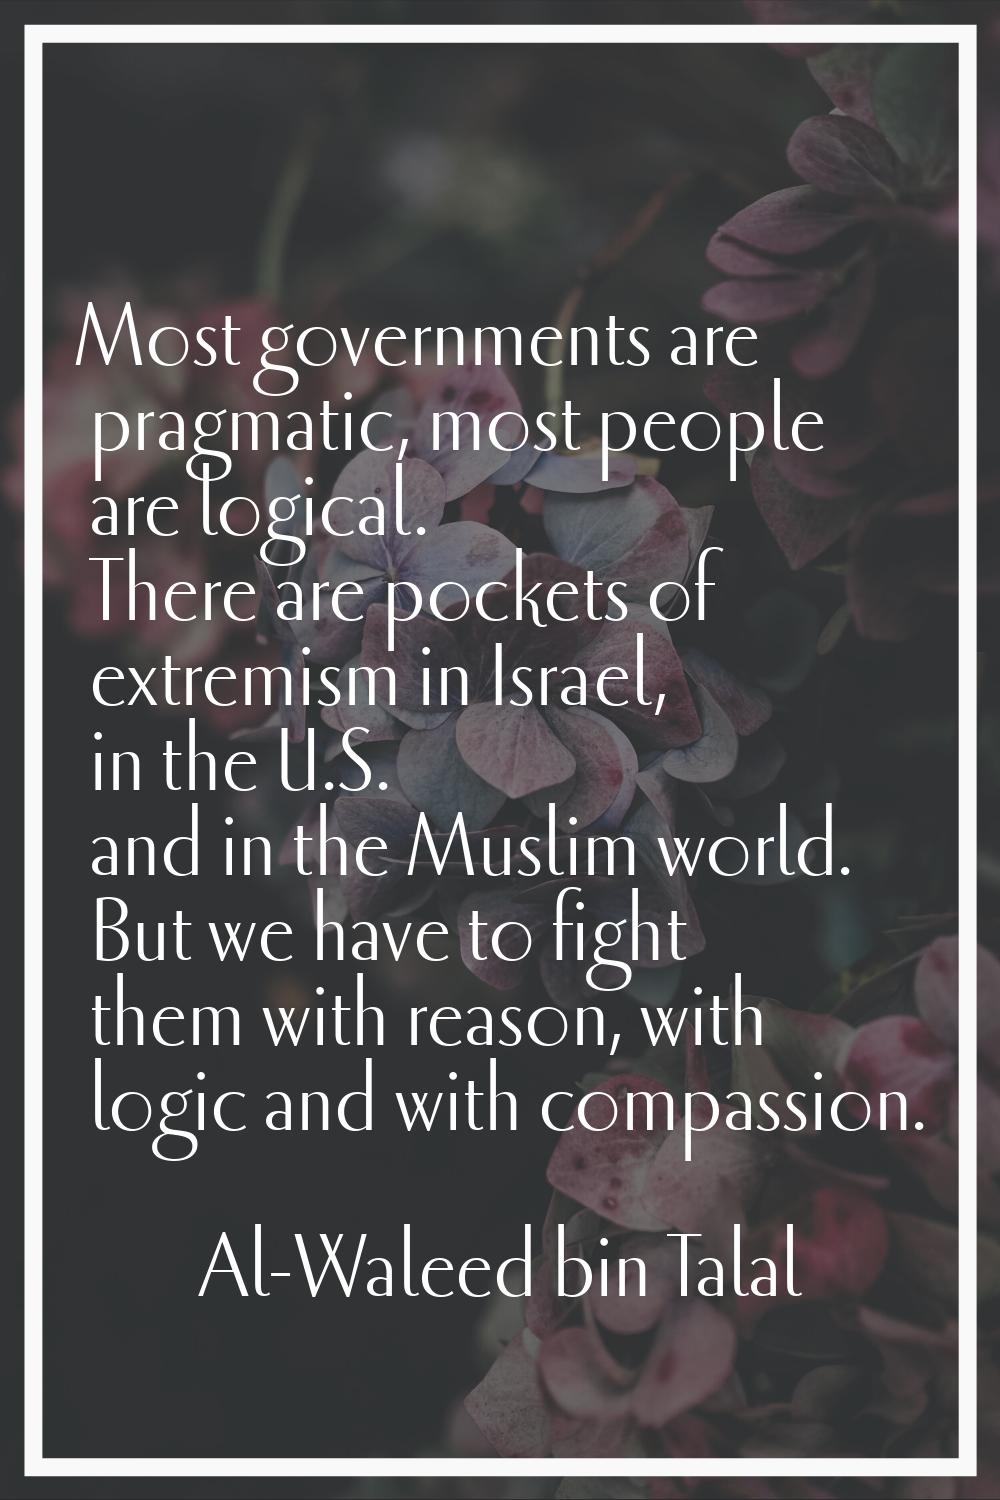 Most governments are pragmatic, most people are logical. There are pockets of extremism in Israel, 